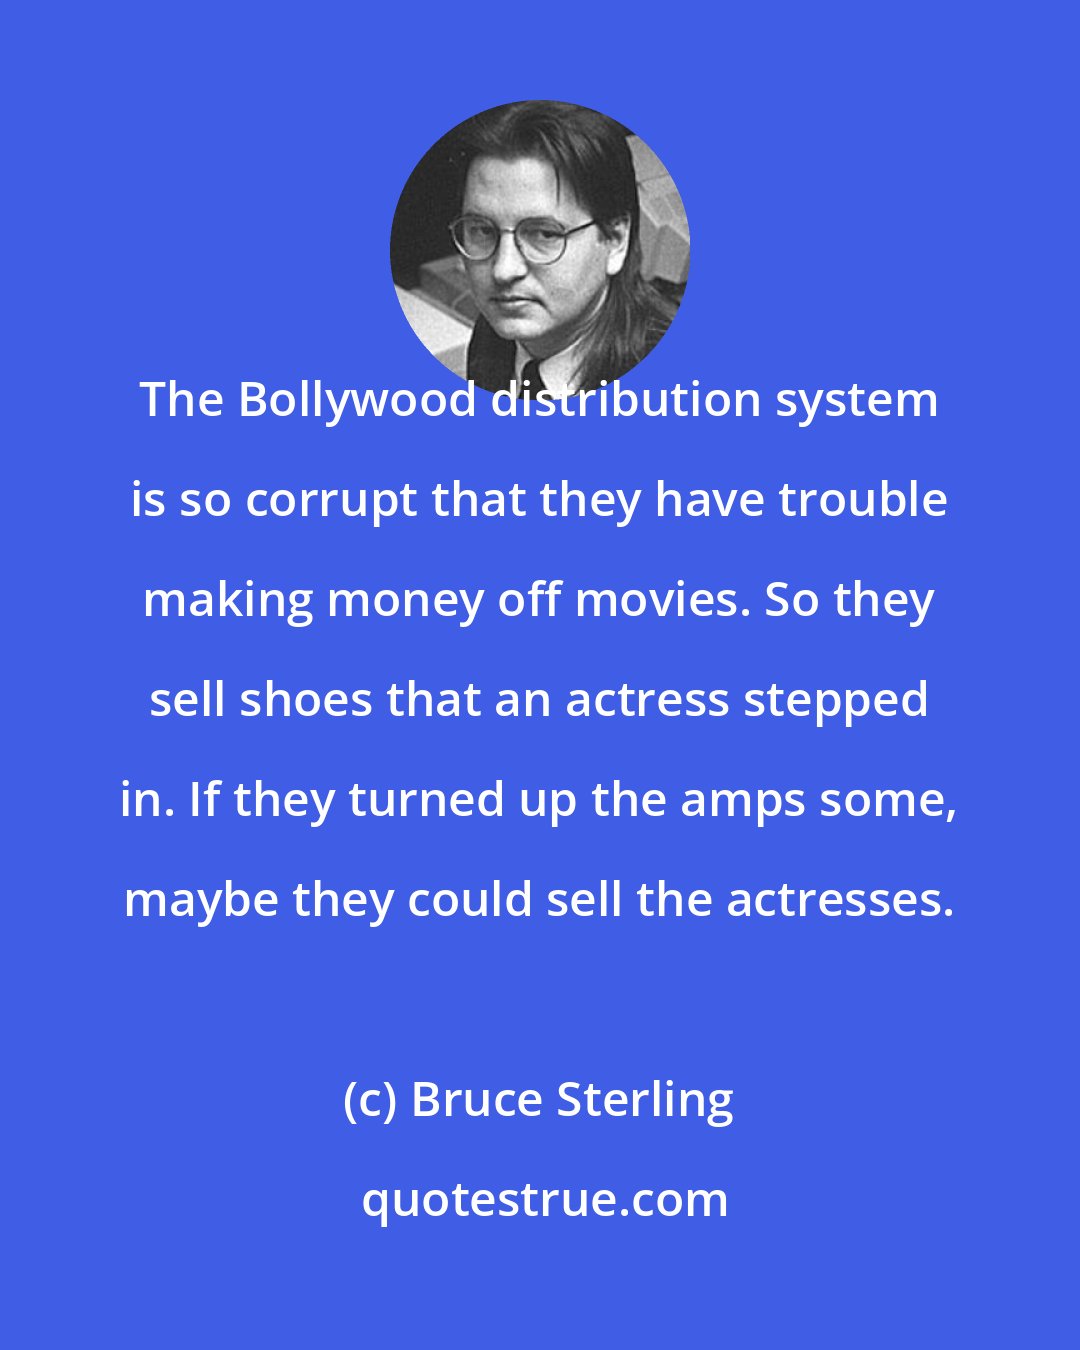 Bruce Sterling: The Bollywood distribution system is so corrupt that they have trouble making money off movies. So they sell shoes that an actress stepped in. If they turned up the amps some, maybe they could sell the actresses.